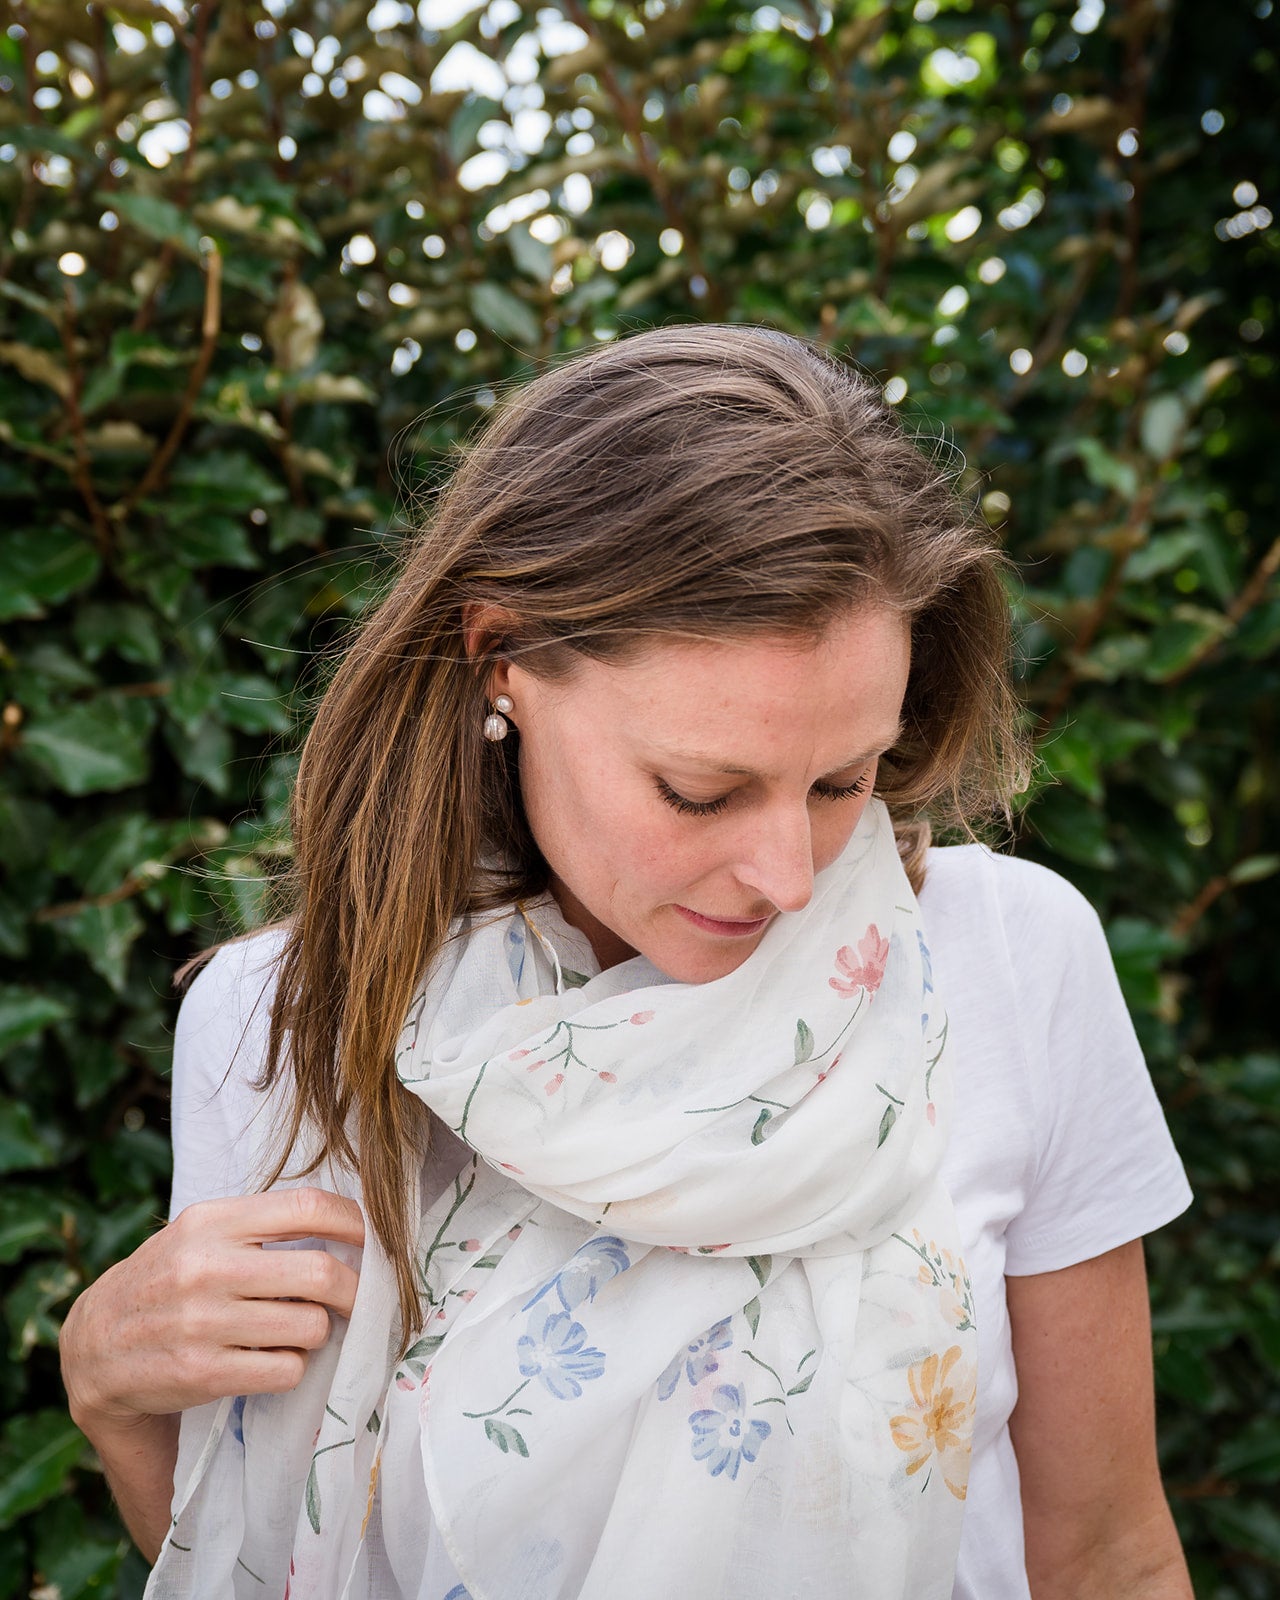 Elevate your look with our soft white-based scarf, featuring a beautifully designed floral print in pastel pinks, blues, and yellows. White tassels at each corner complete the look, making this accessory a must-have for any wardrobe. The soft white base provides versatility, allowing easy pairing with a wide range of colours and styles.